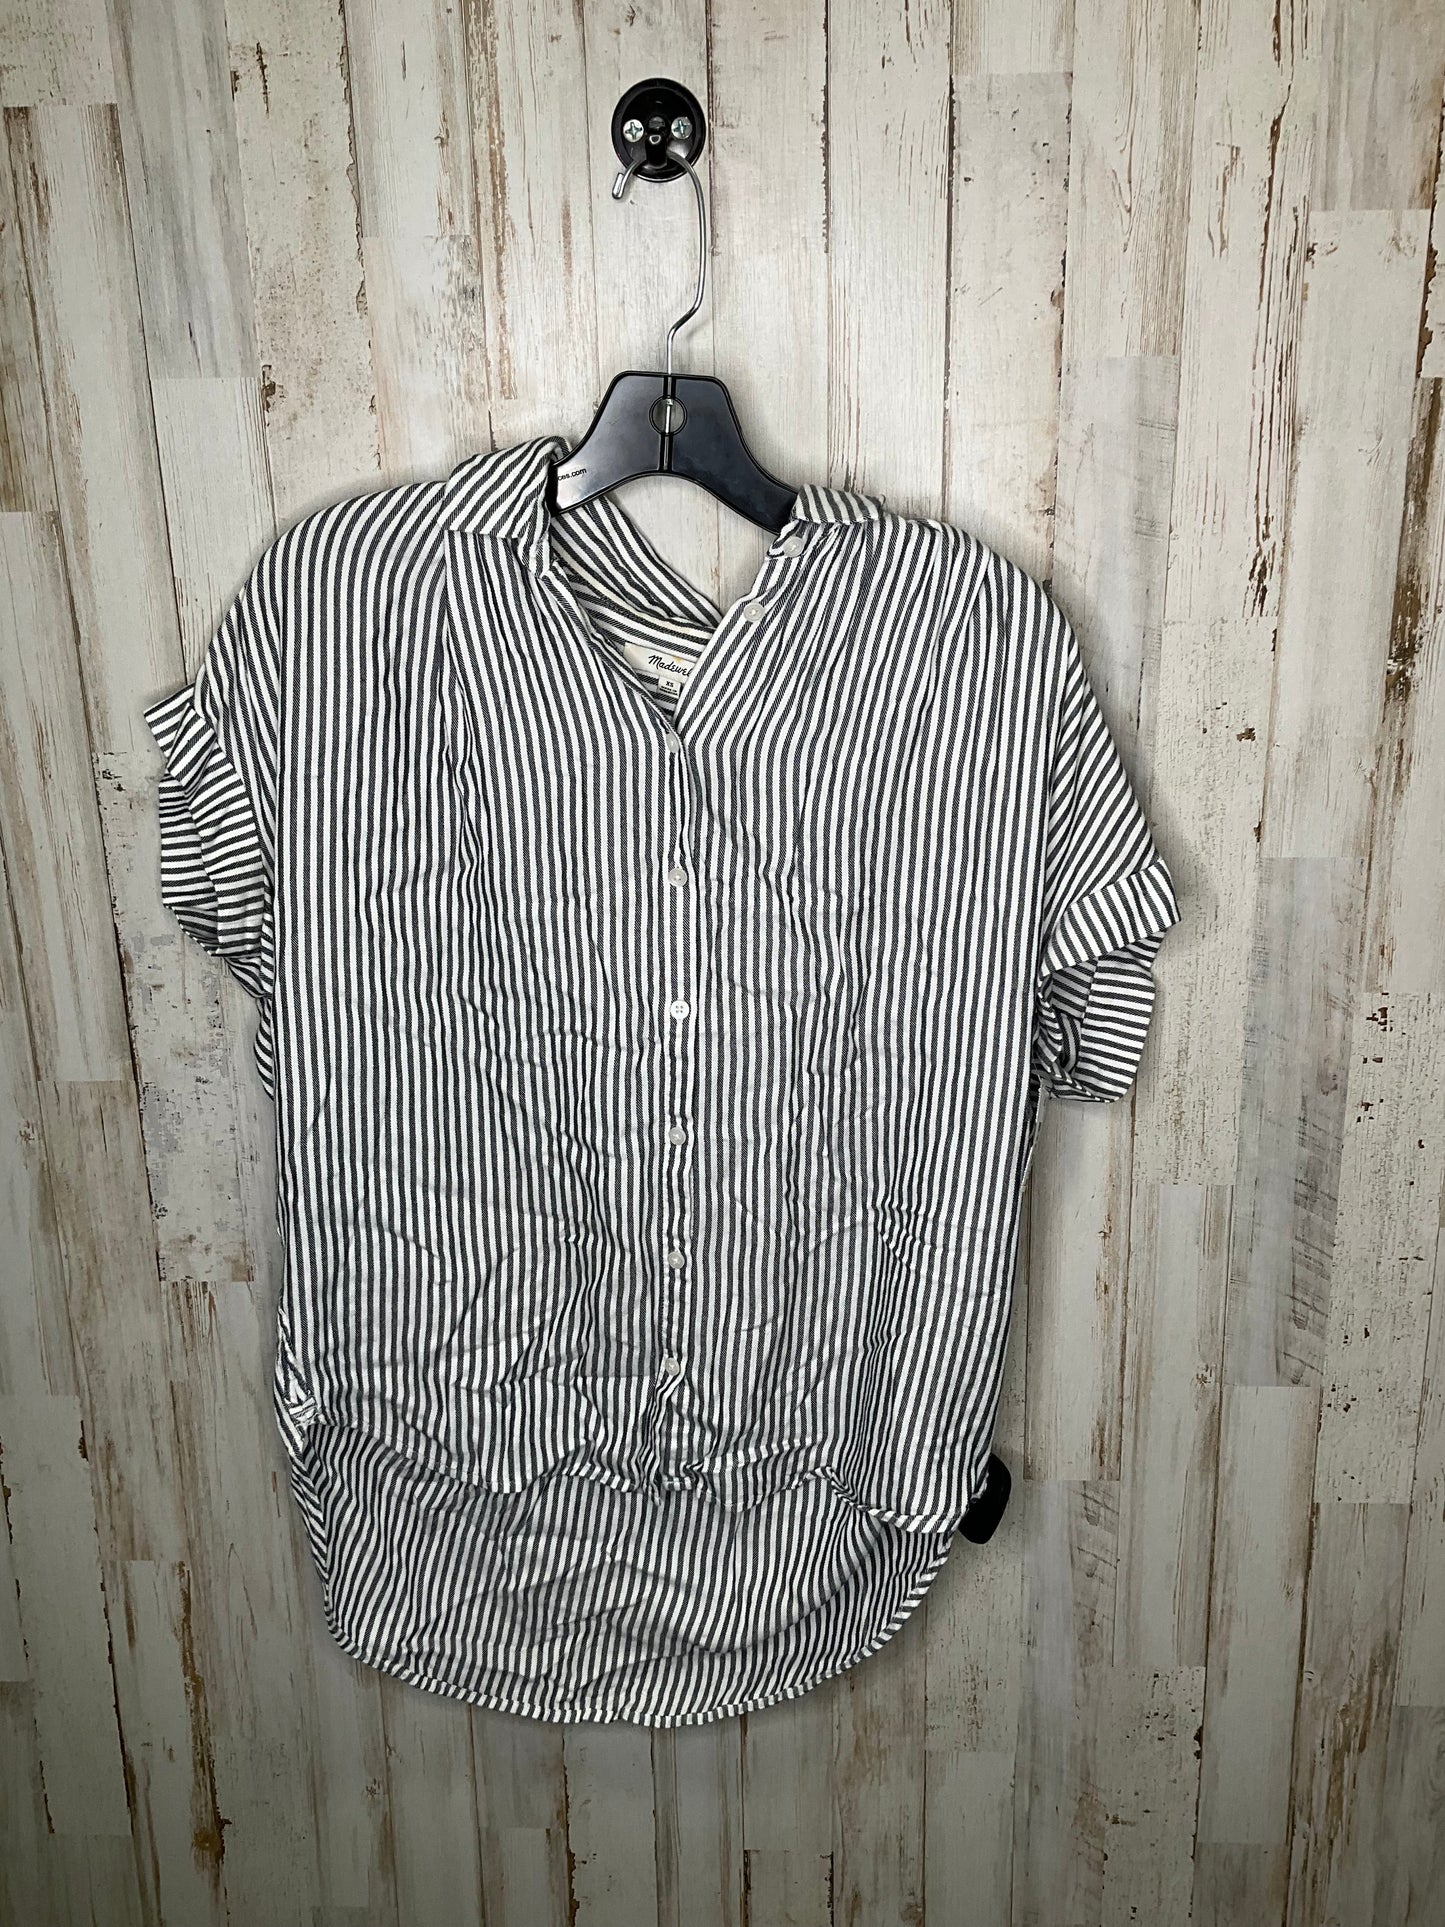 Striped Pattern Top Short Sleeve Madewell, Size Xs